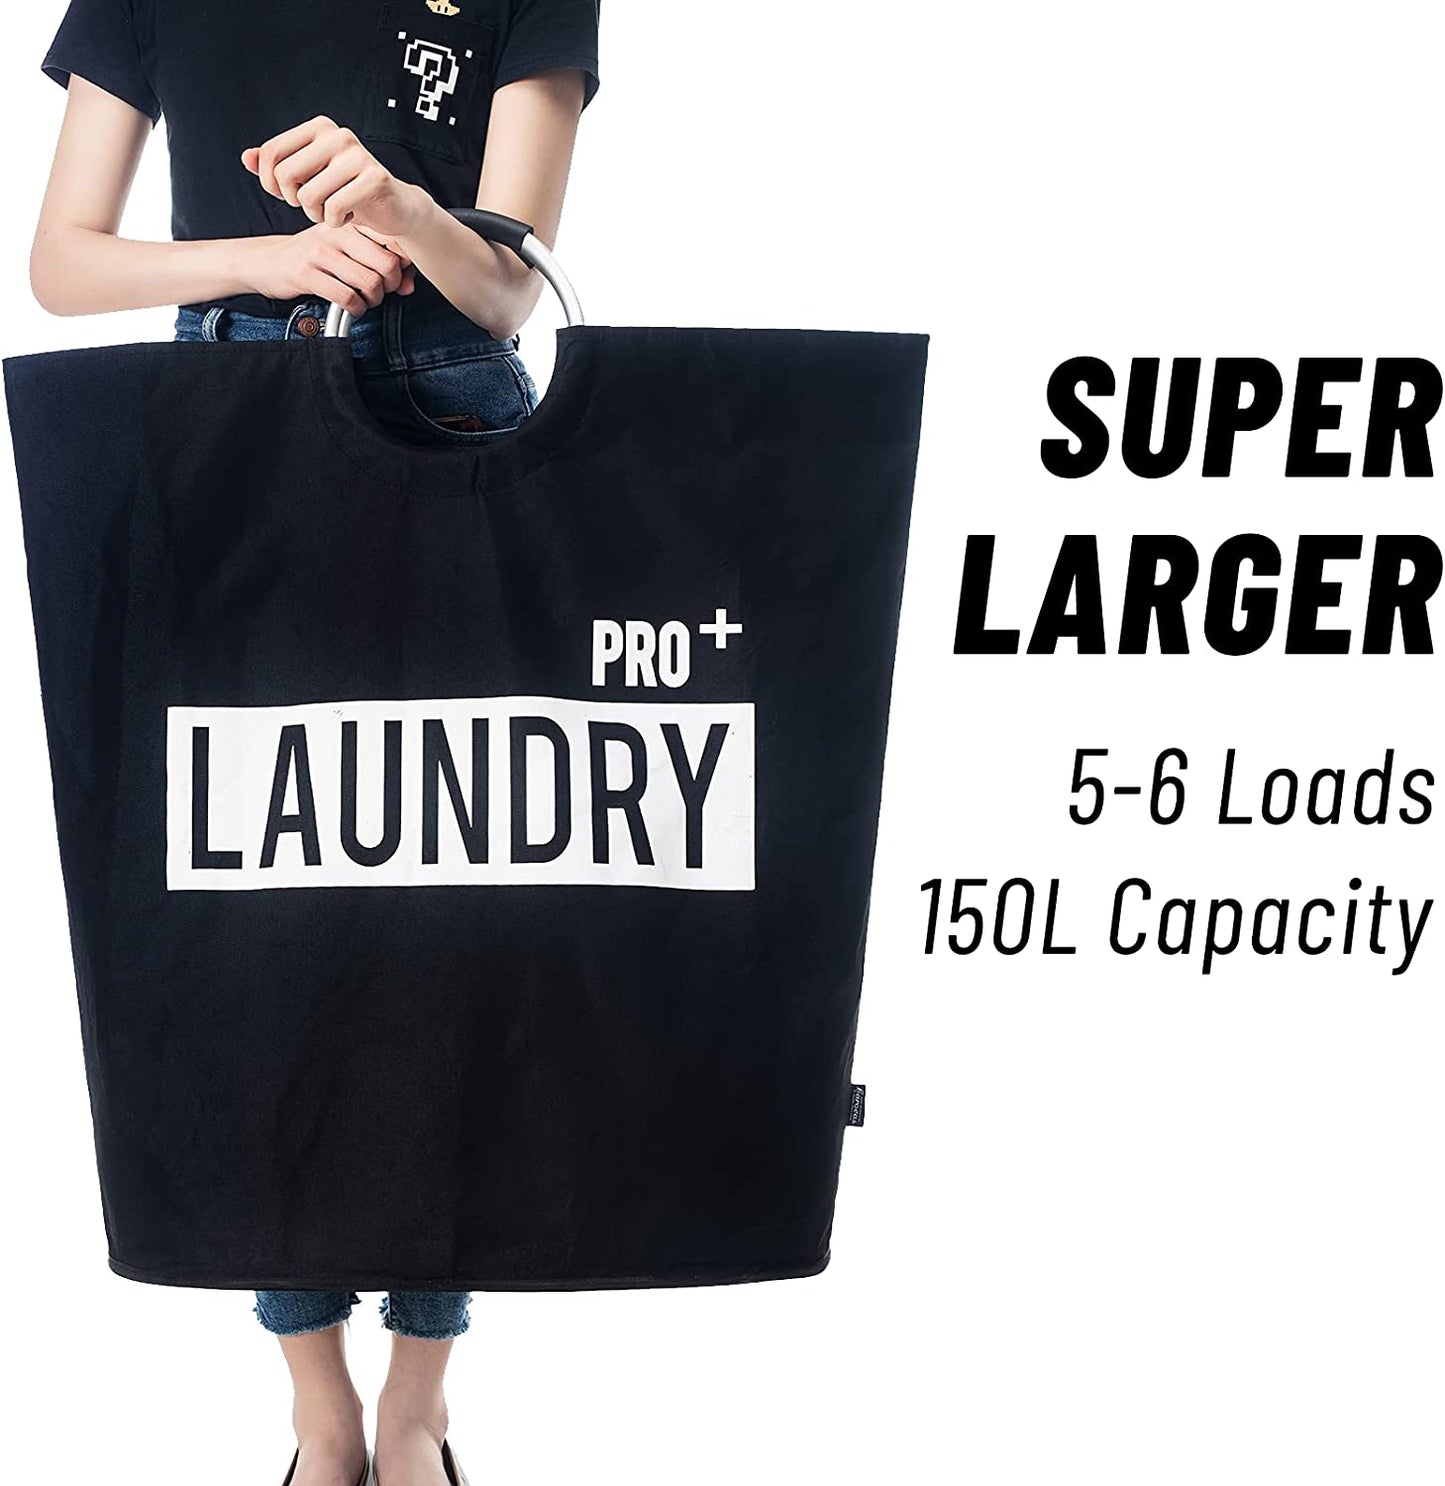 Super Large 150L Laundry Basket Pro, Waterproof Laundry Hamper, Collapsible Laundry Basket Easy Storage, Clothes Hamper Stands up Well, Laundry Bag with Padded Handles (Black)